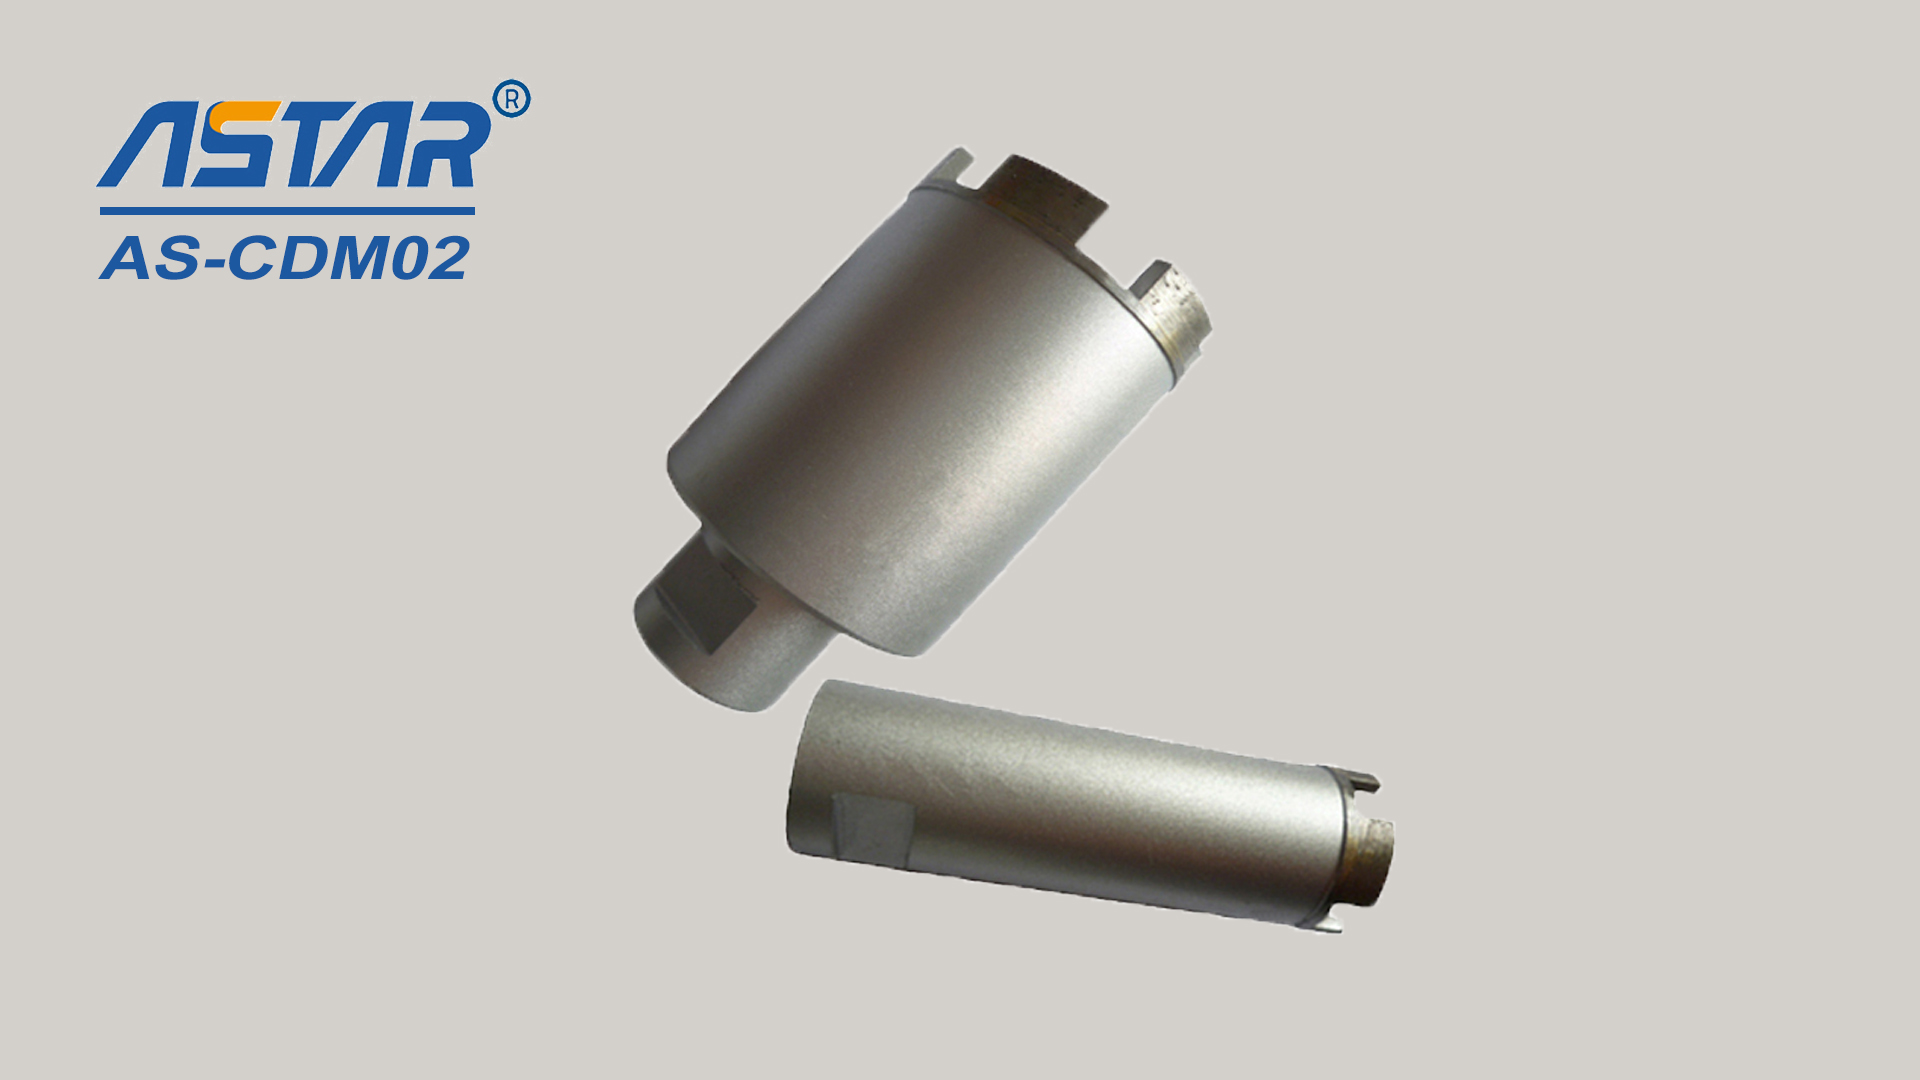 Diamond core drill bits for drilling concrete,granite from diameter 50mm to 400mm with length 60mm to 500mm